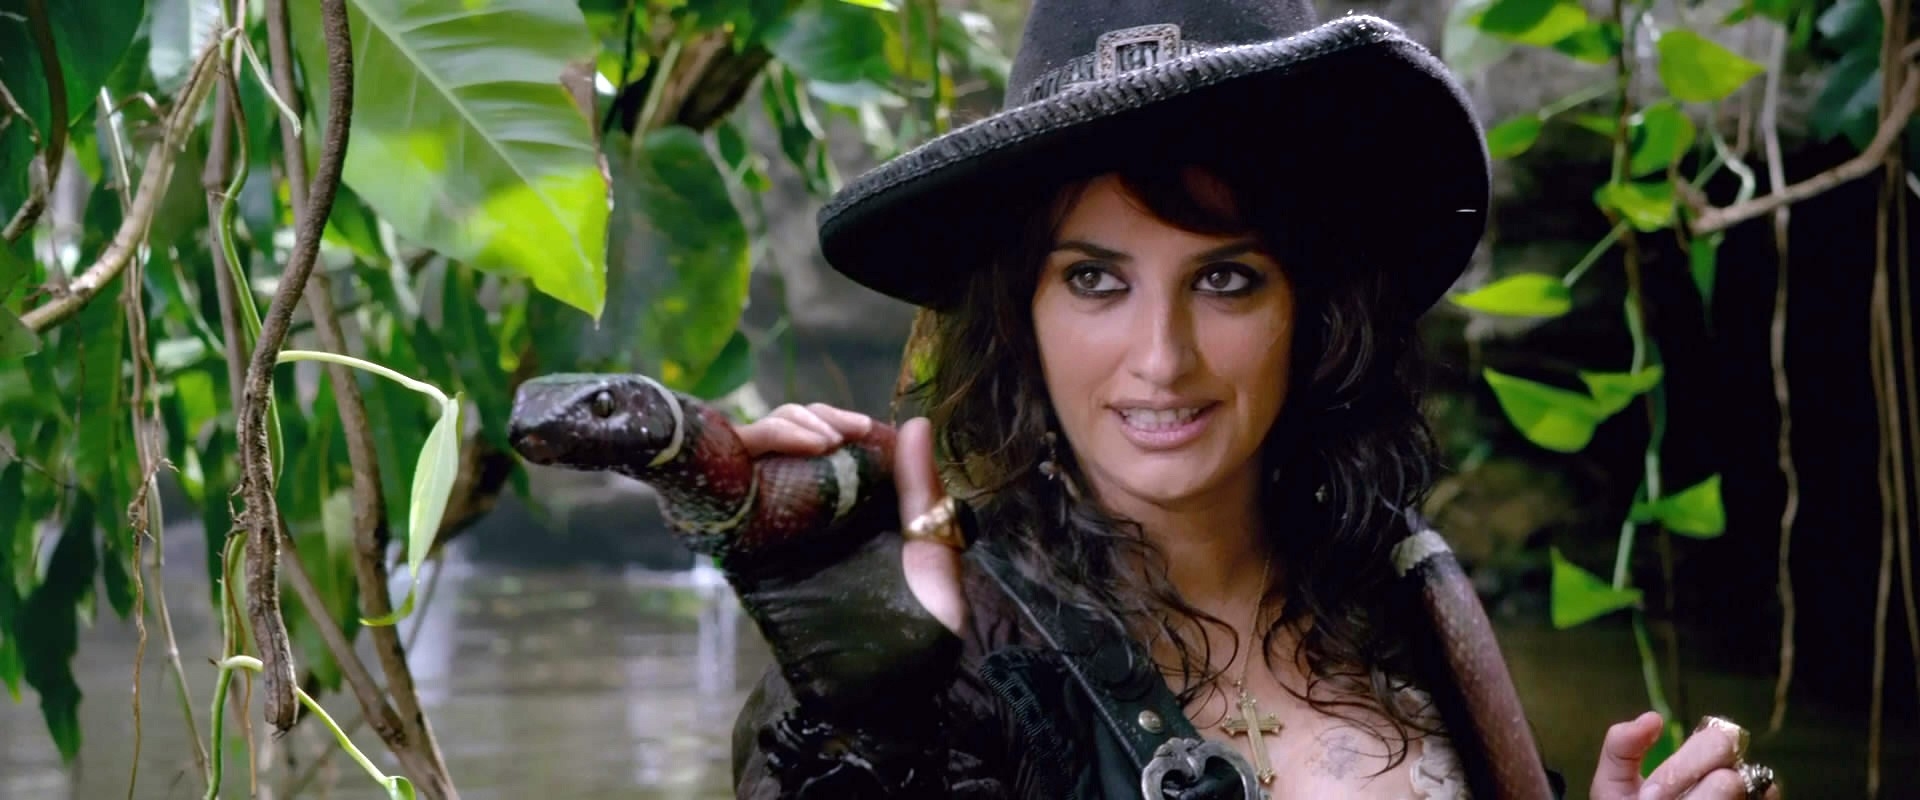 penelope cruz pirates of the caribbean pirates of the caribbean on stranger tides 1920x800 wallpa High Quality Wallpaper, High Definition Wallpaper